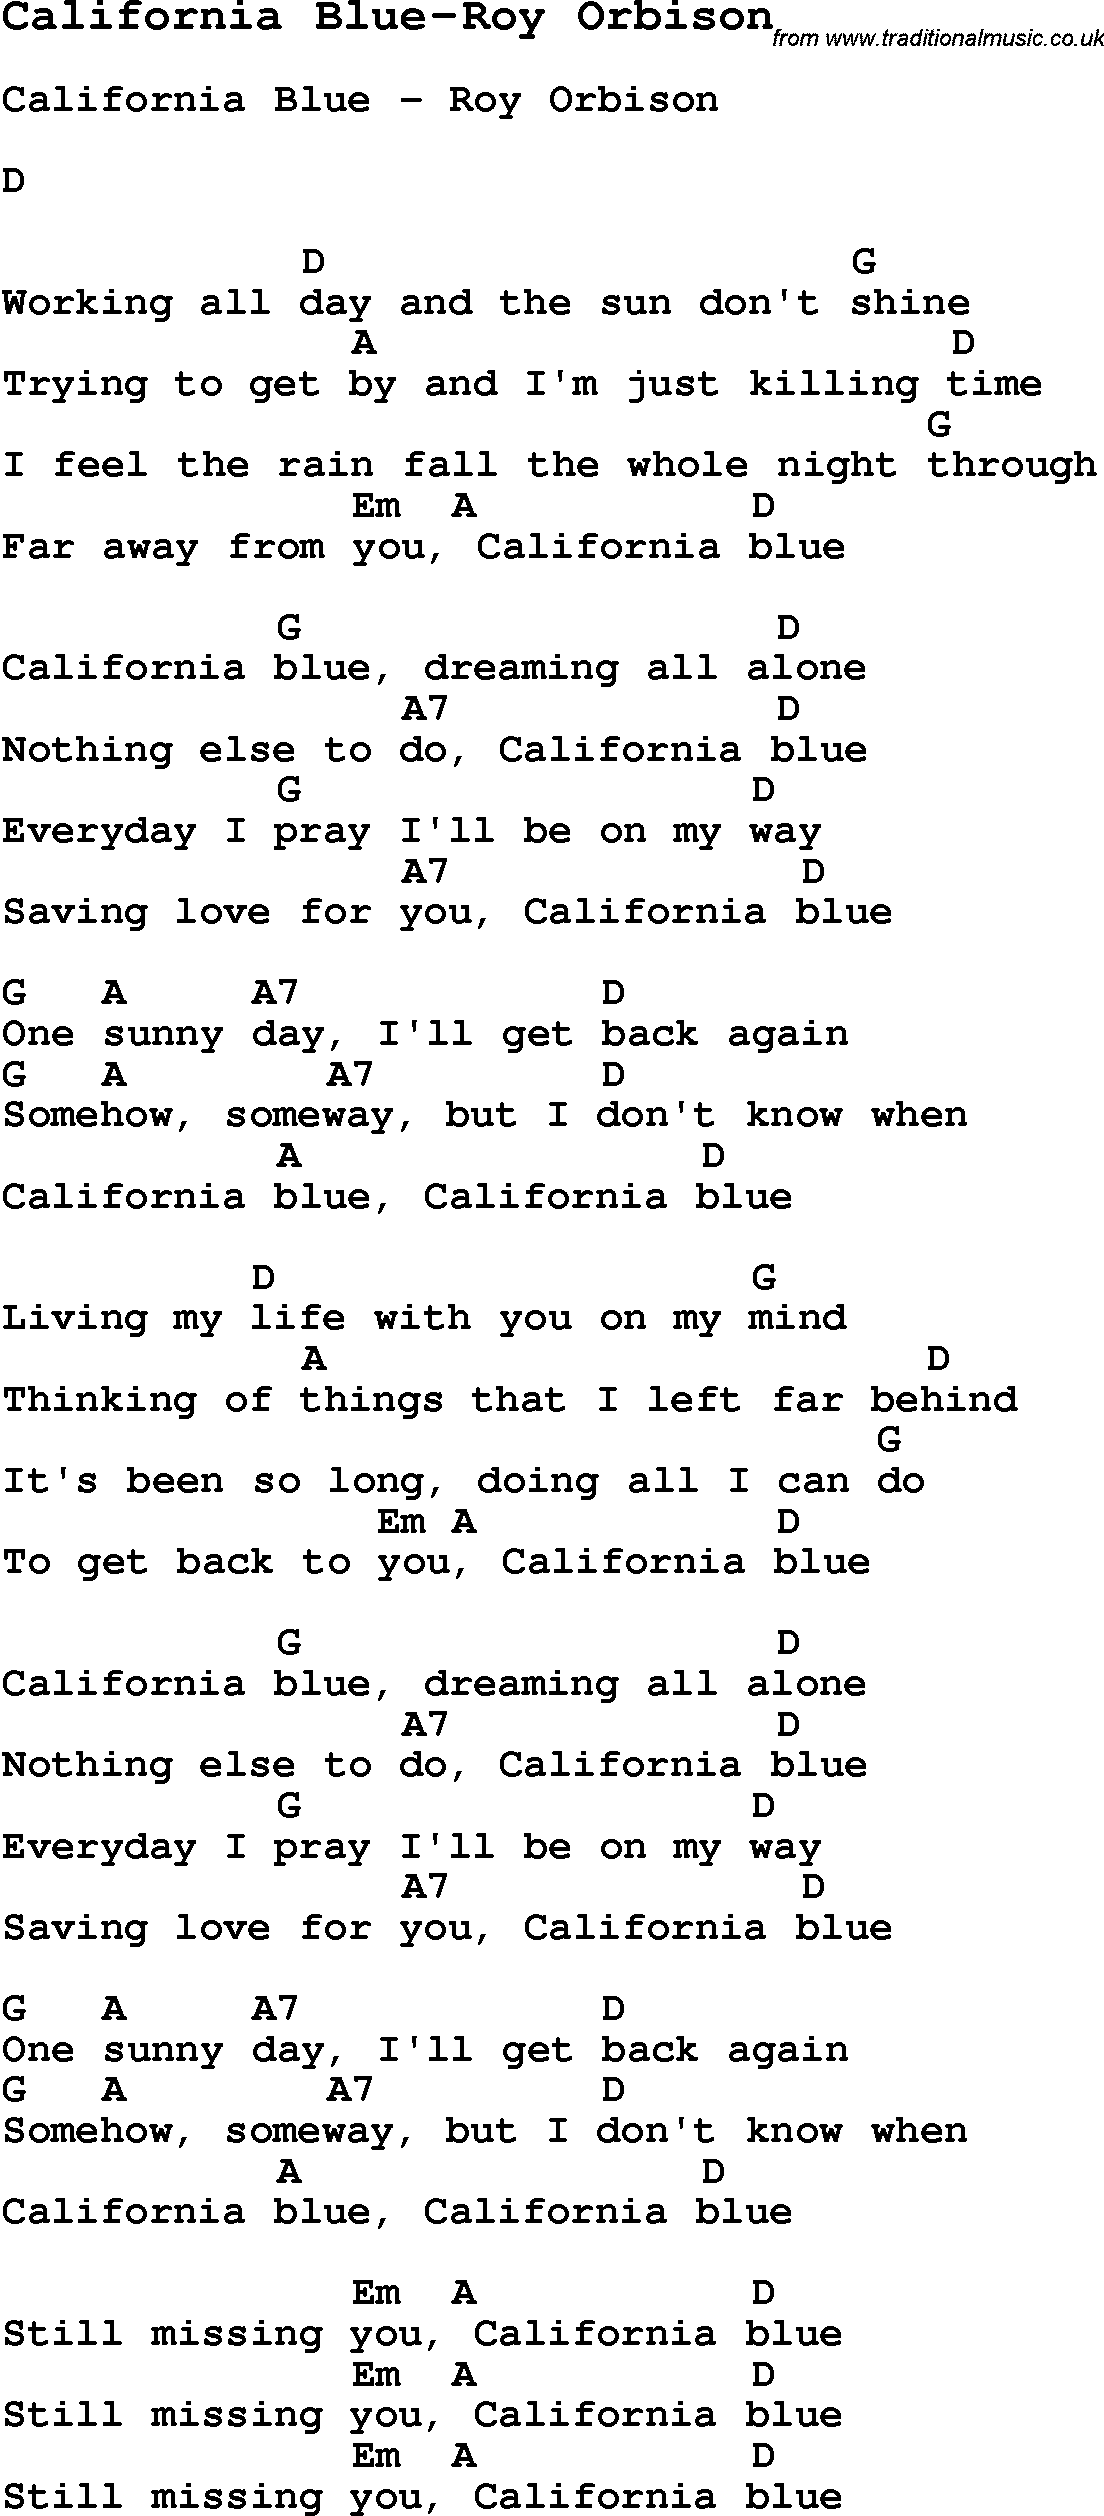 Blues Guitar Song, lyrics, chords, tablature, playing hints for California Blue-Roy Orbison